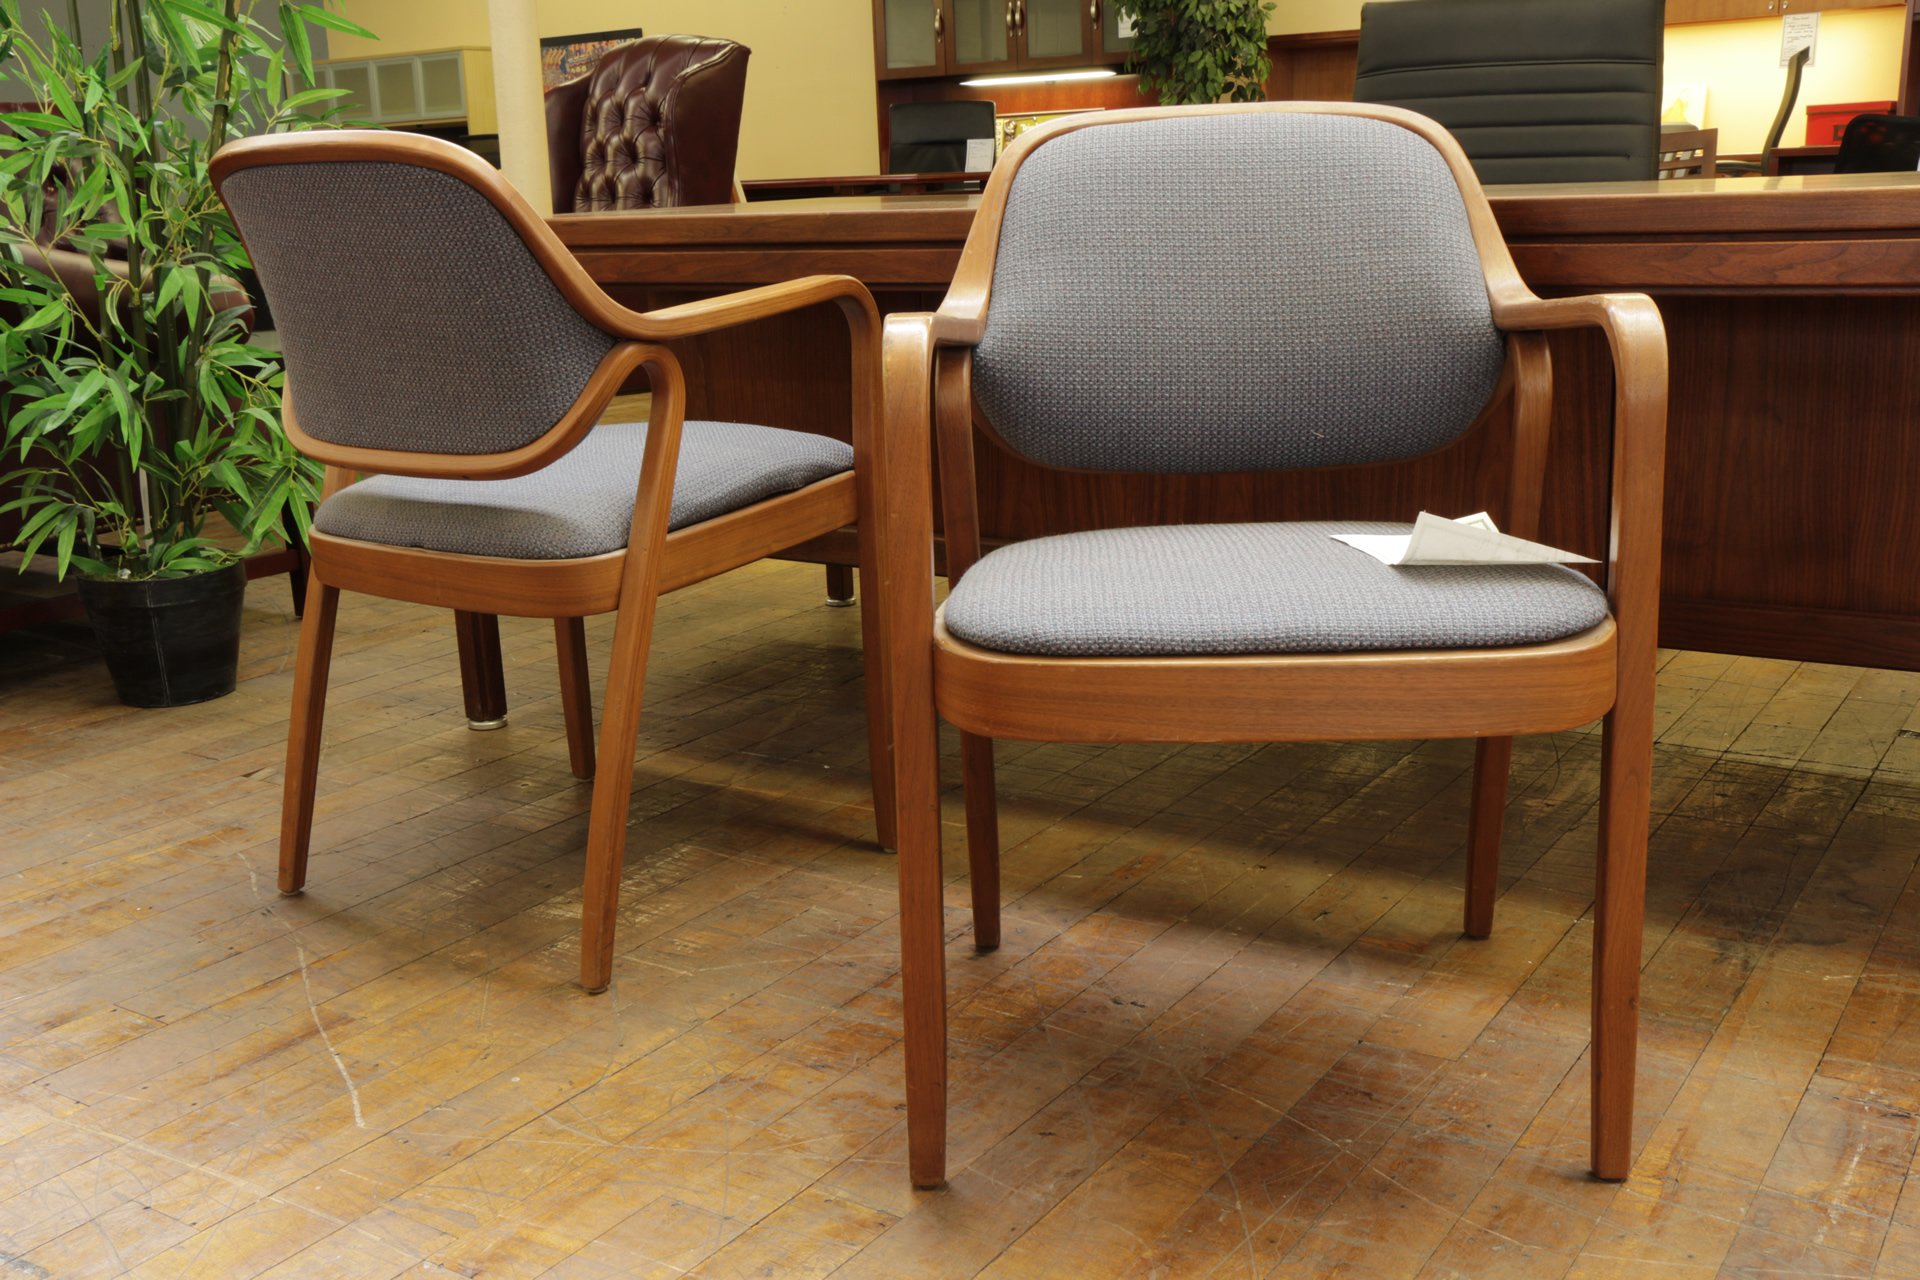 Knoll ‘Petit’ Bent Wood Frame Side Chairs (Used)